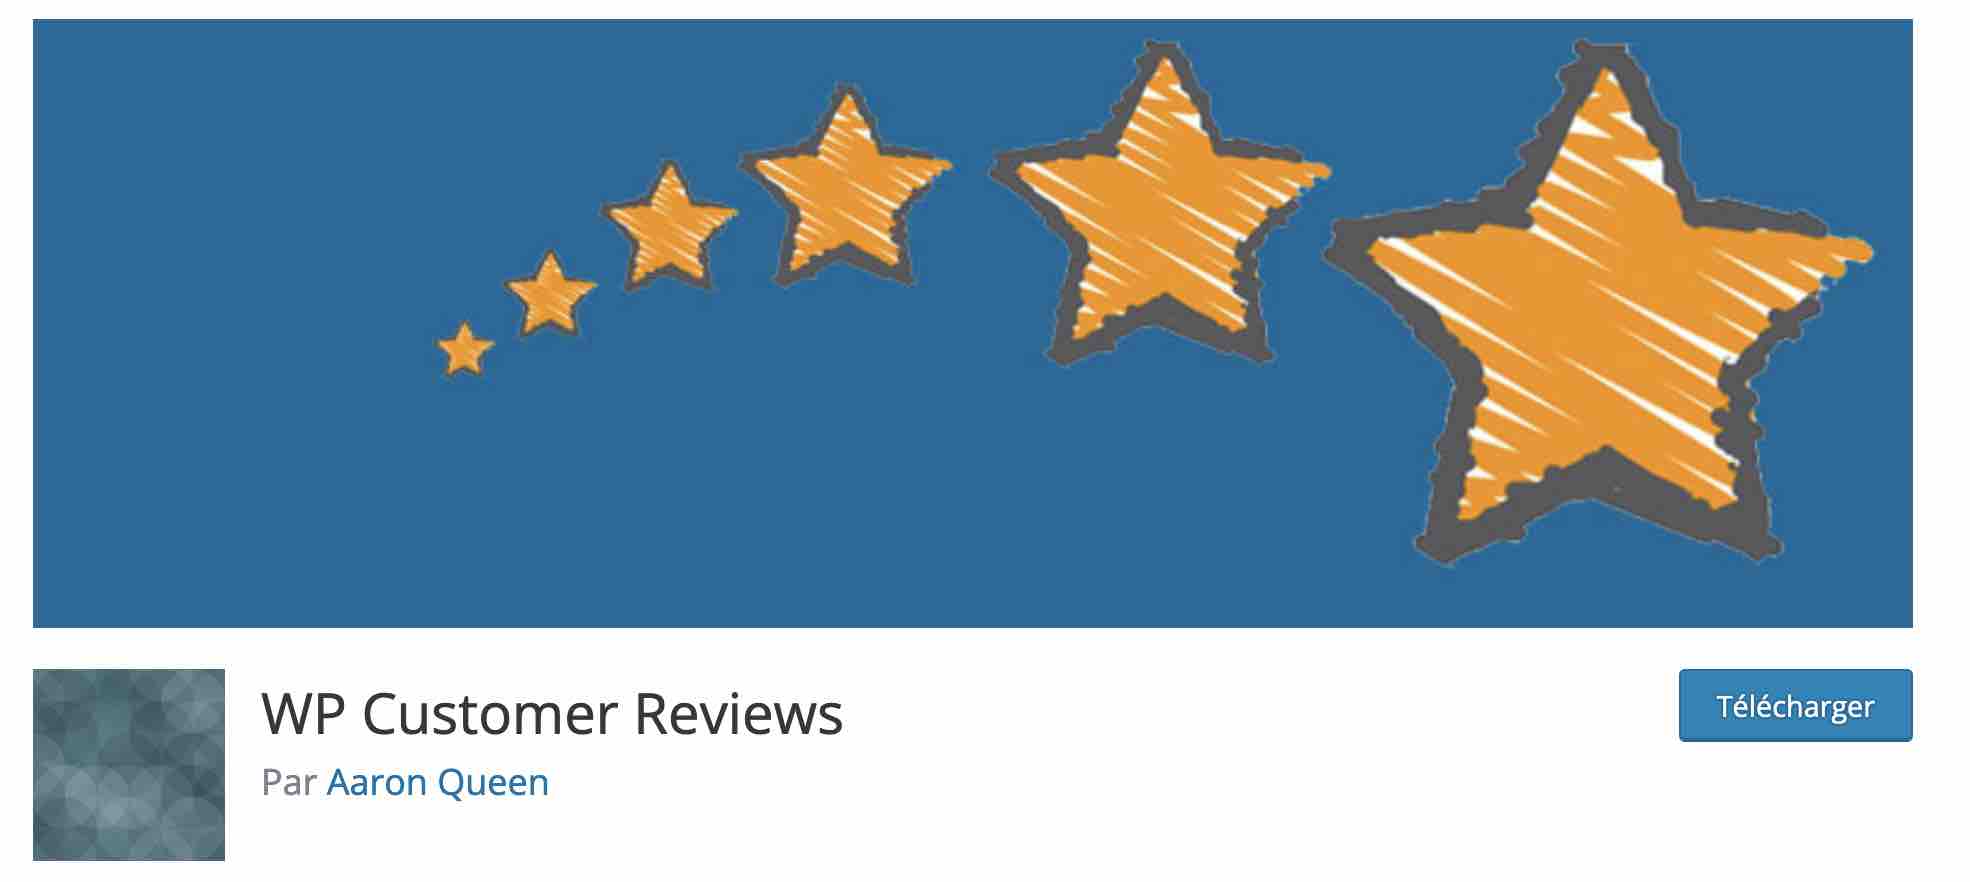 The WP Customer Reviews plugin allows you to display customer reviews on a WordPress site.